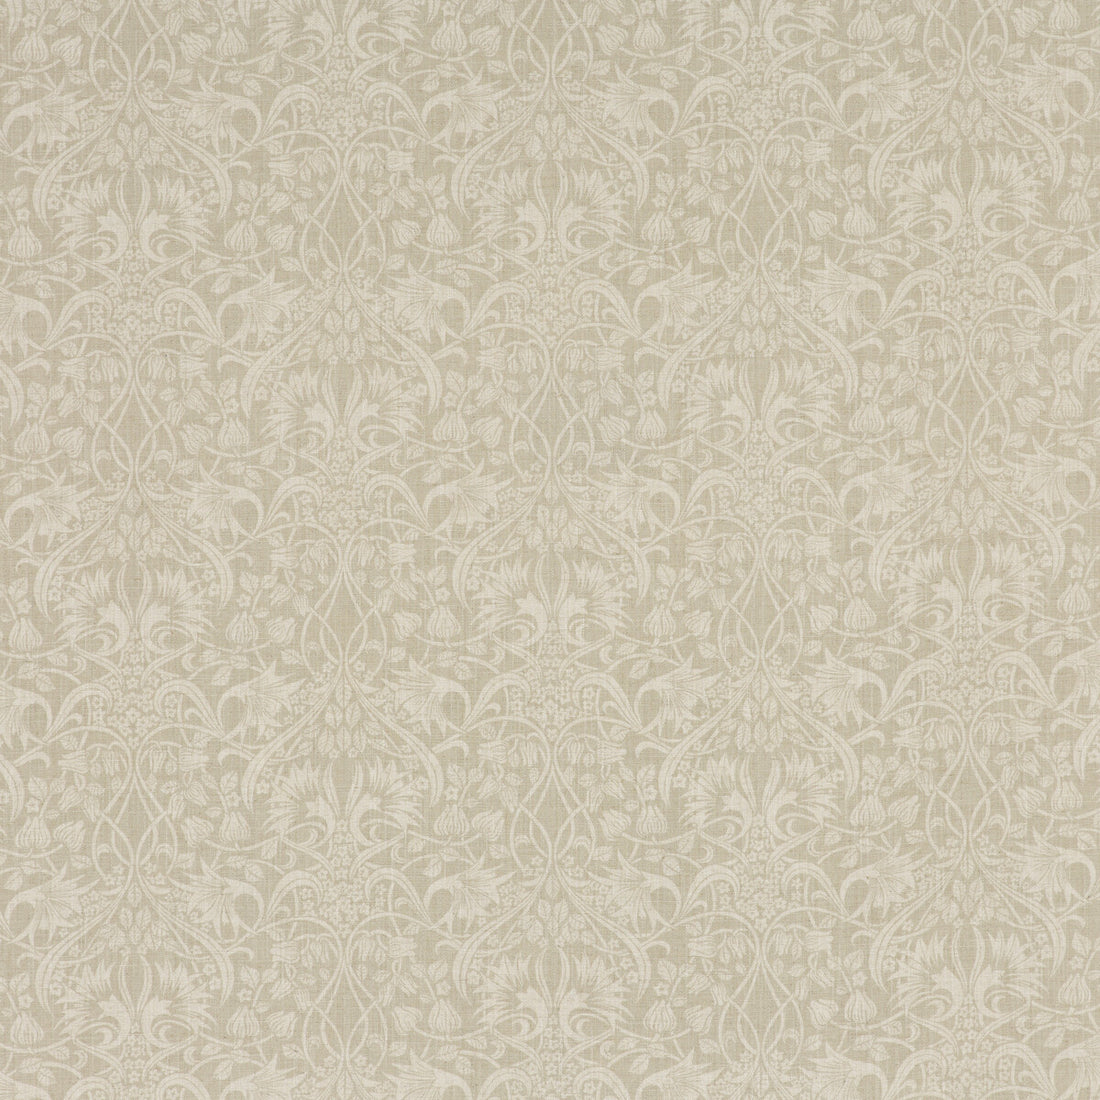 Fritillerie fabric in stone color - pattern BP10620.4.0 - by G P &amp; J Baker in the Originals V collection